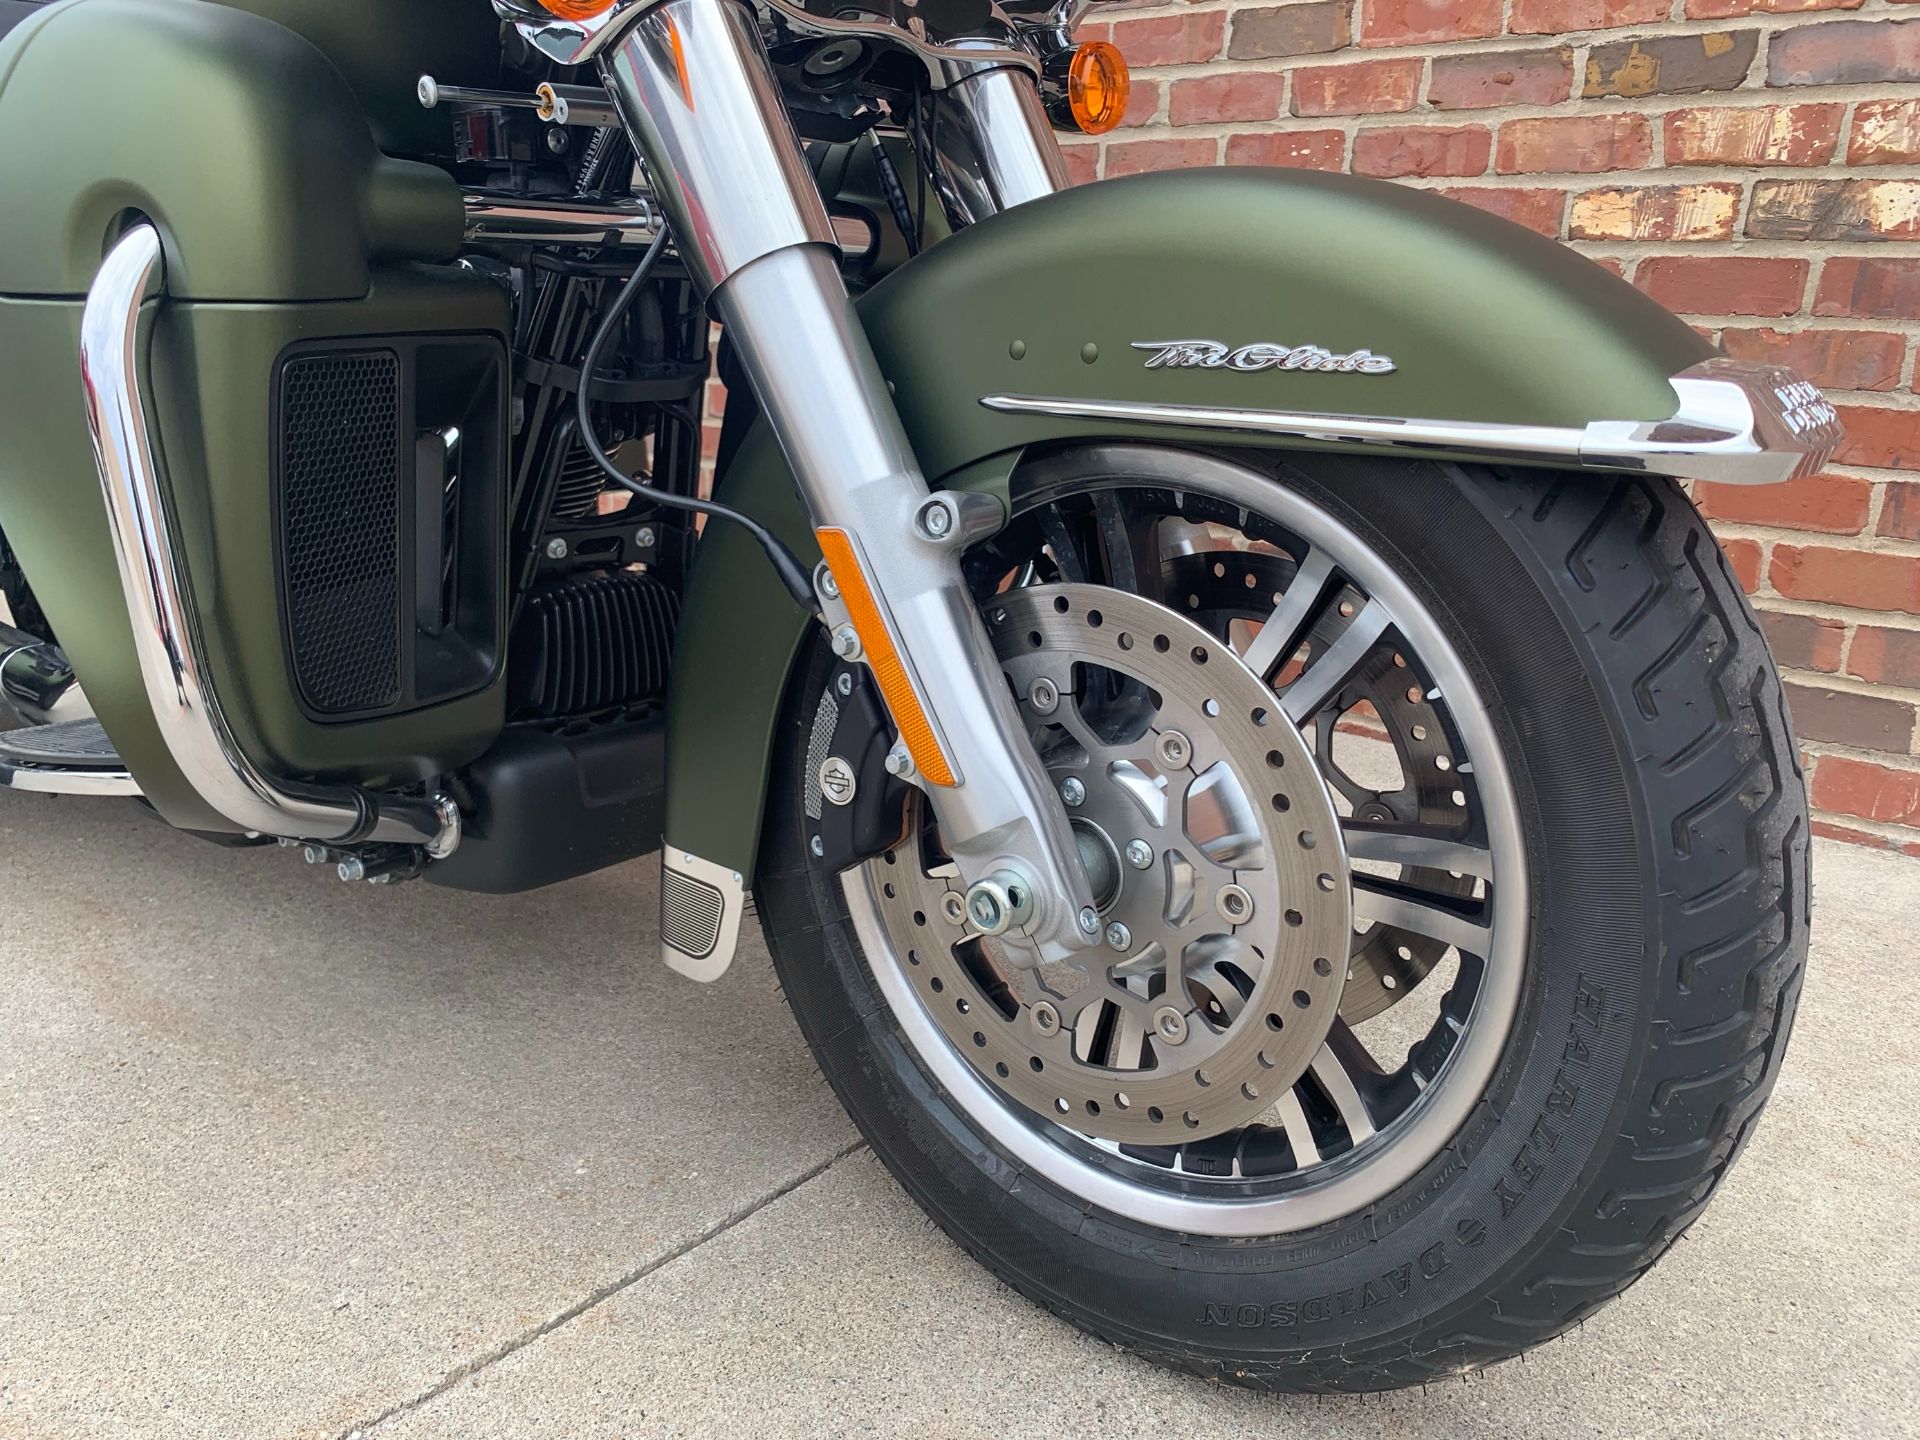 2022 Harley-Davidson Tri Glide Ultra (G.I. Enthusiast Collection) in Ames, Iowa - Photo 8